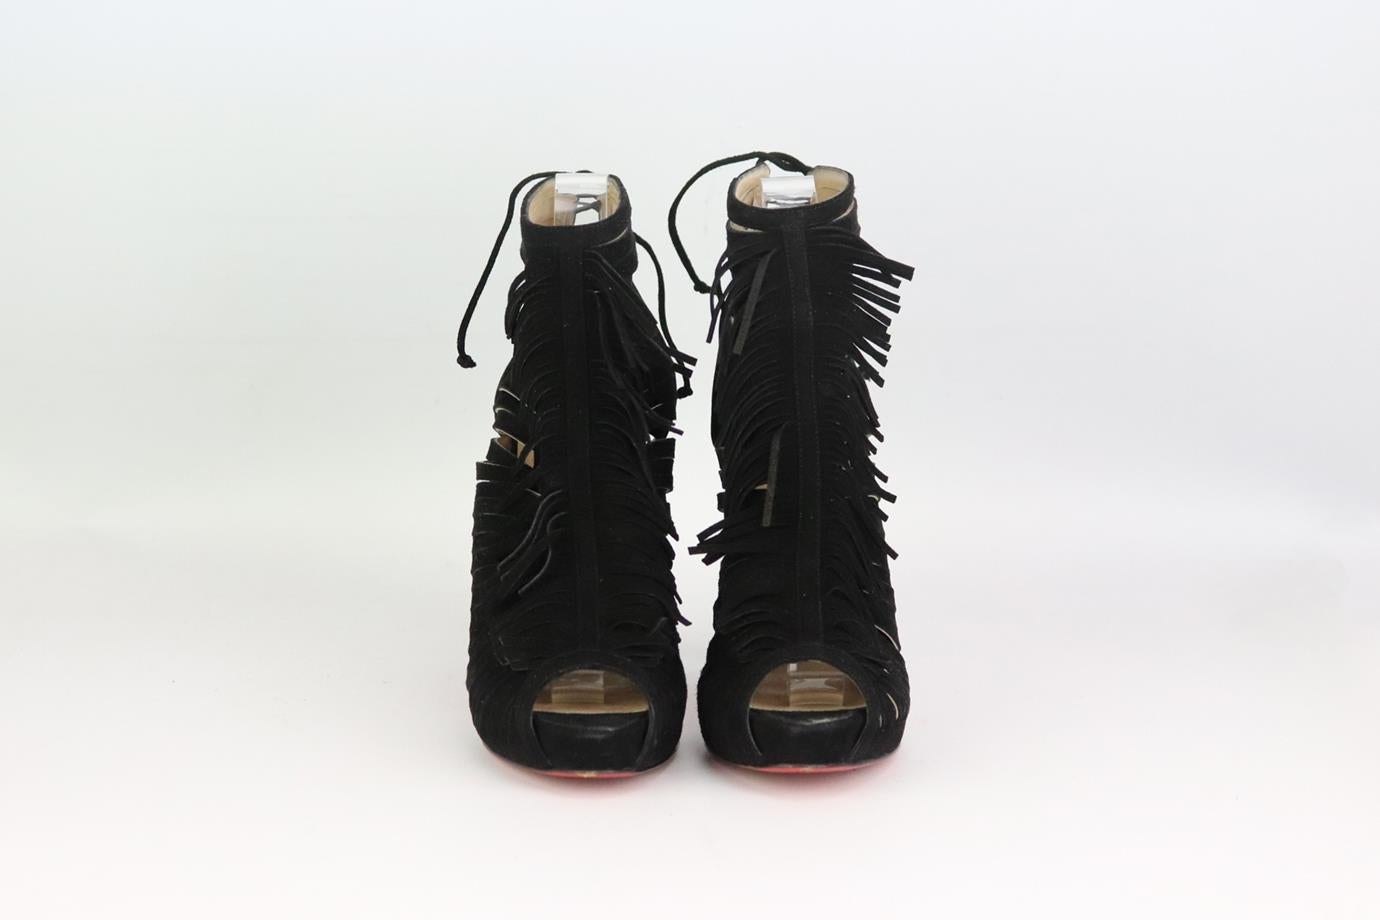 Christian Louboutin fringed cutout suede sandals. Made from black suede with fringed detail down the front, lace up at the back and set on the brand’s iconic red sole. Black. Lace up fastening at back. Does not come with box or dustbag. Size: EU